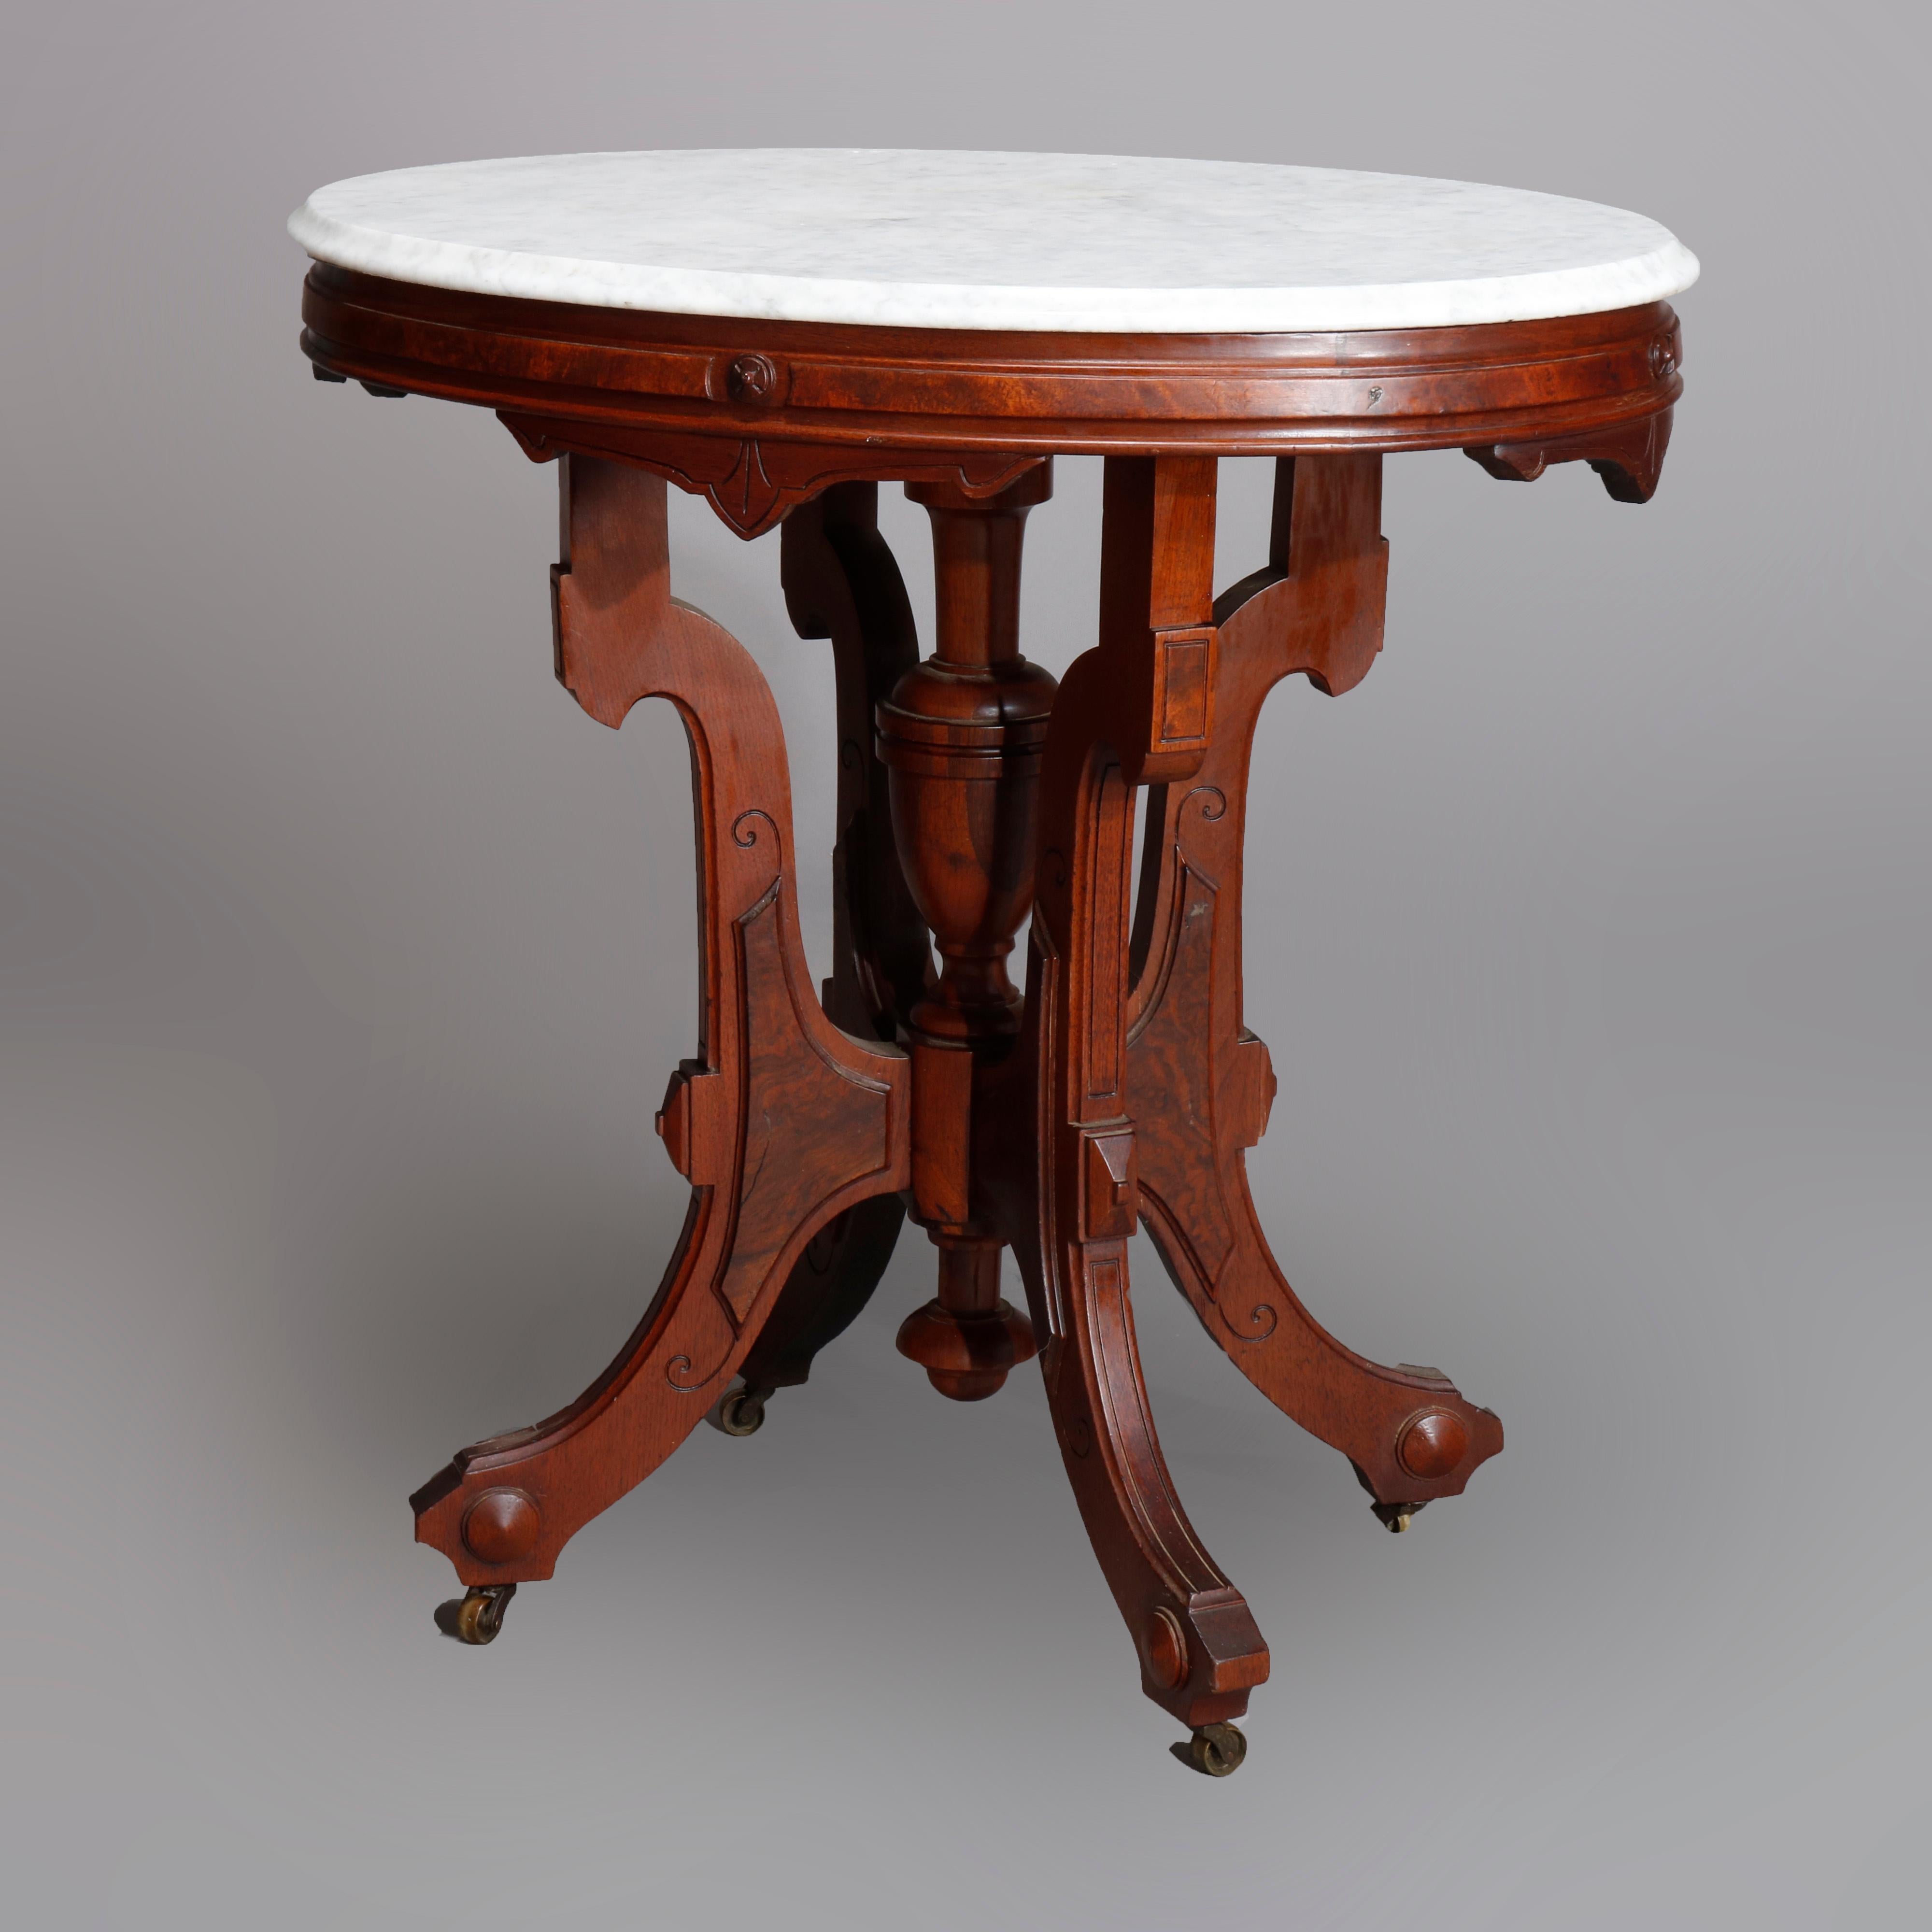 An antique Victorian parlor table offers walnut construction with beveled marble top over walnut base with burl insets and raised on scroll form legs with central turned column, c1890.

Measures: 30